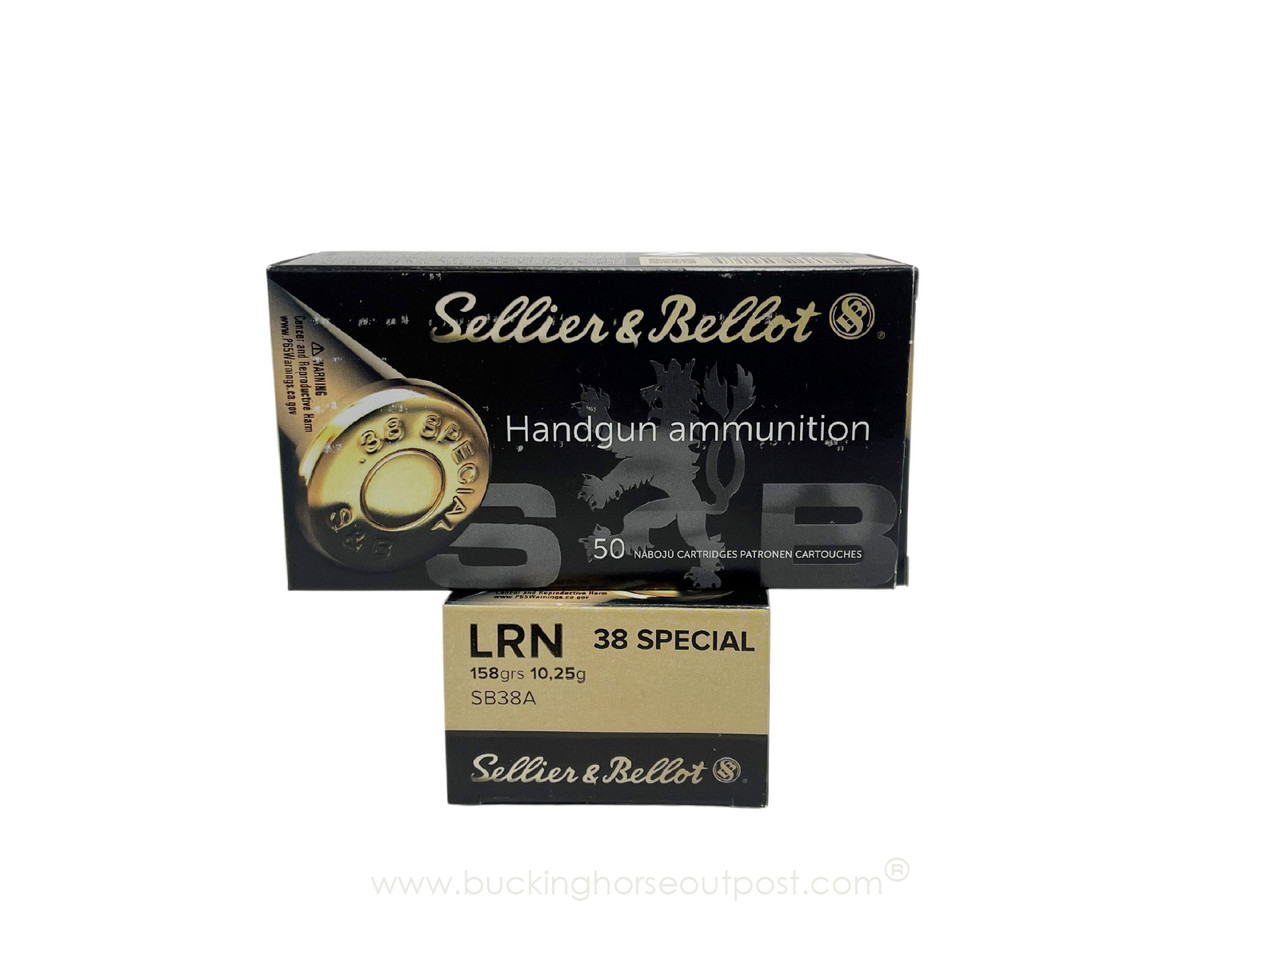 Sellier & Bellot .38 Special 158 Grain Lead Round Nose 50rds Per Box (SB38A)